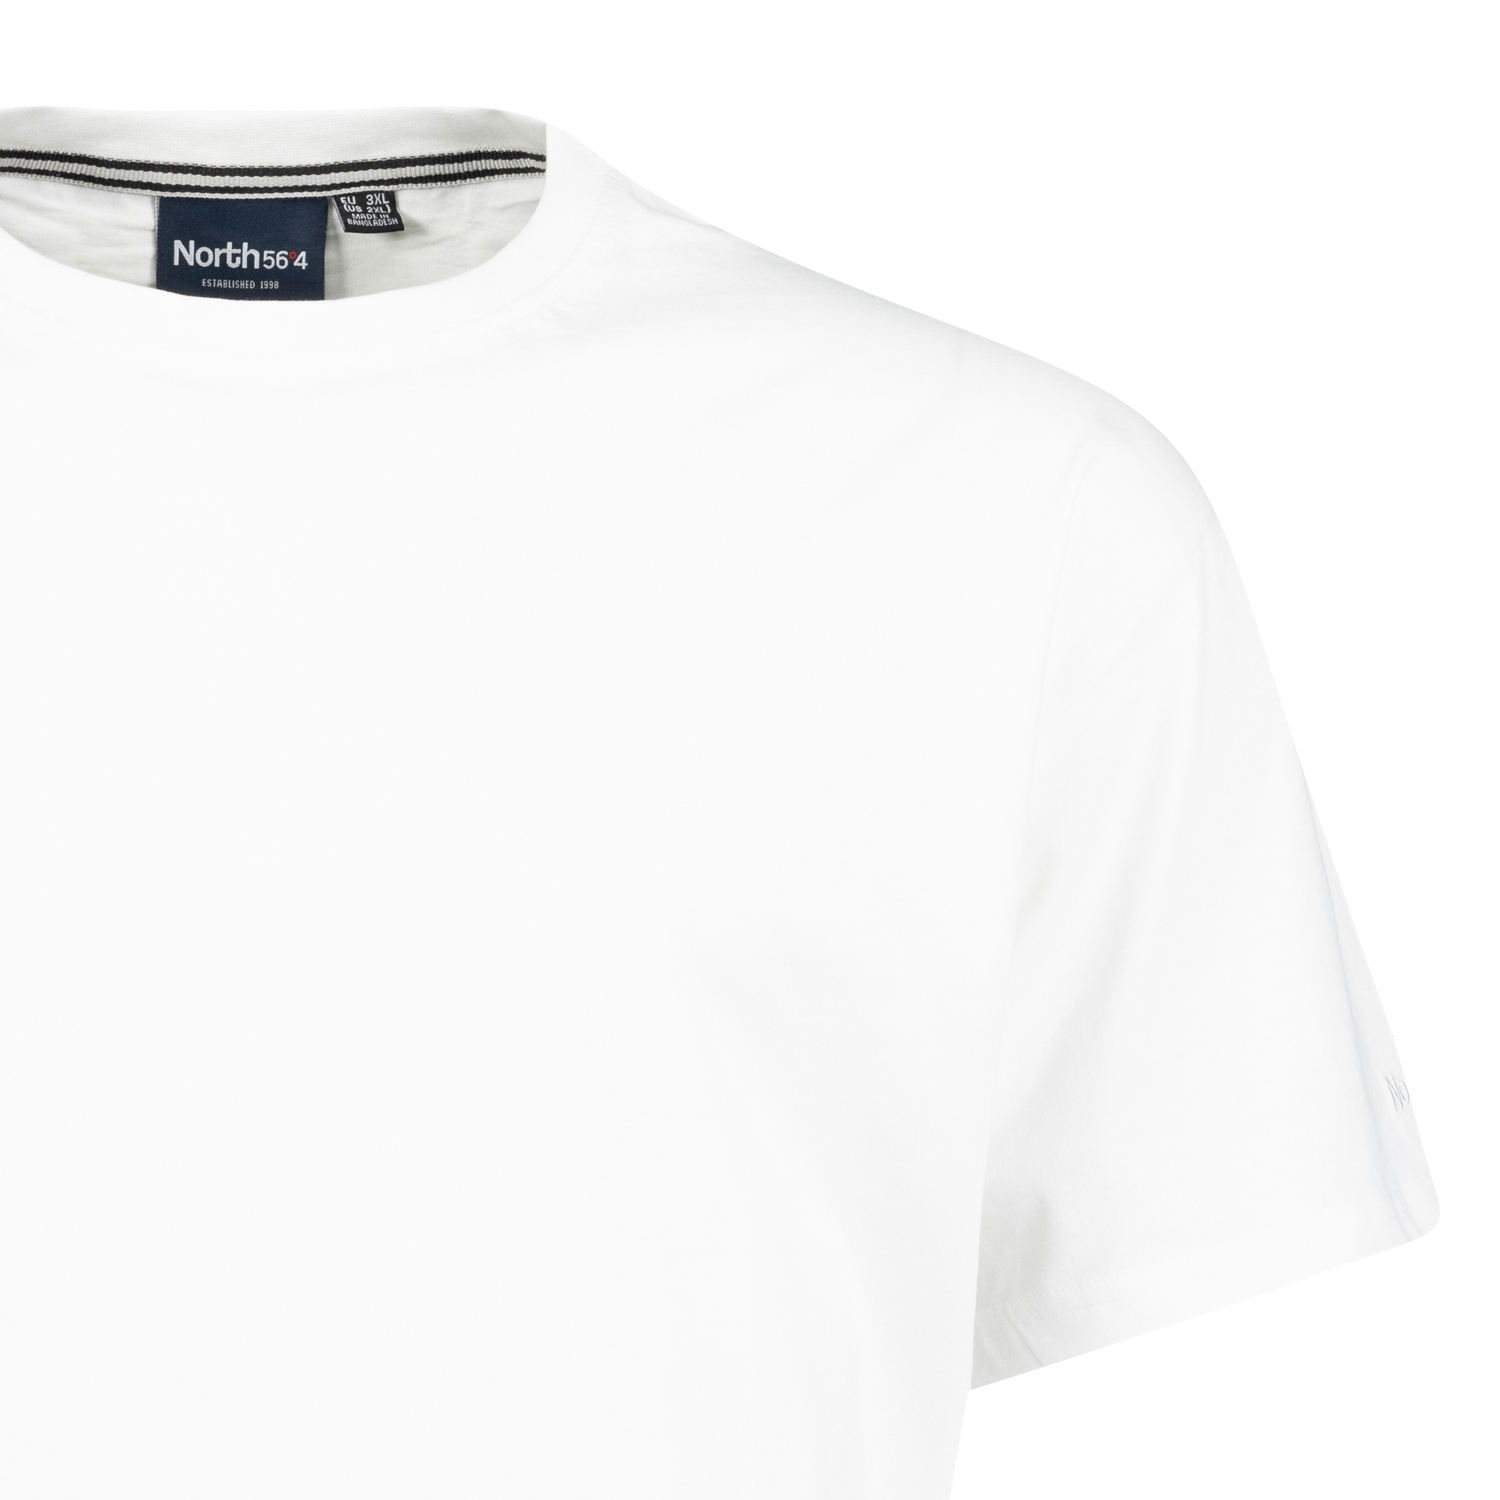 Basic t-shirt in white by North 56°4 in extra large sizes until 8XL